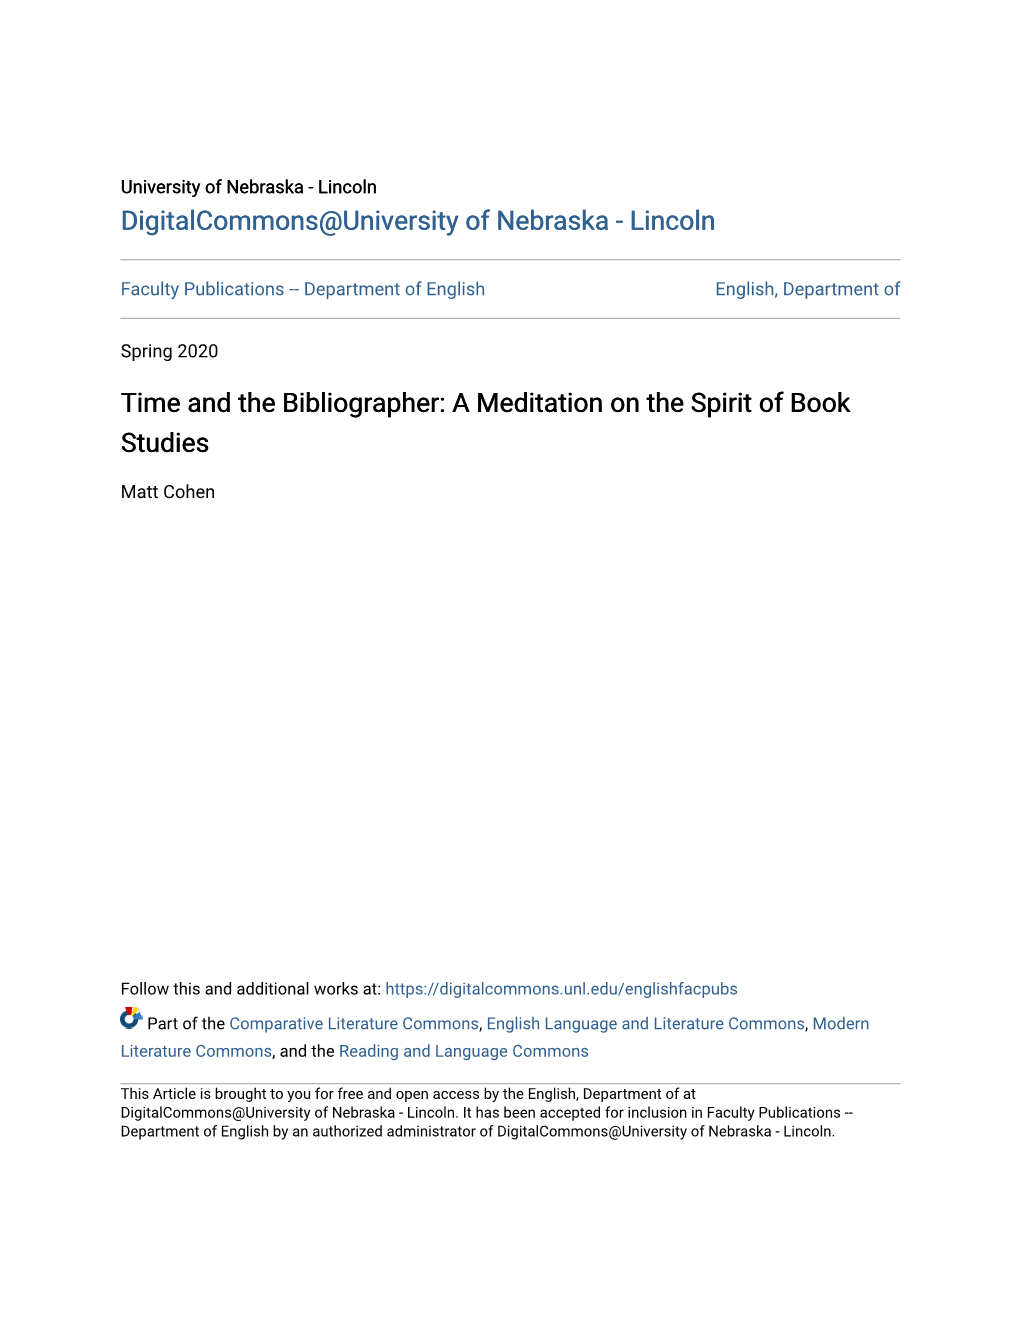 Time and the Bibliographer: a Meditation on the Spirit of Book Studies